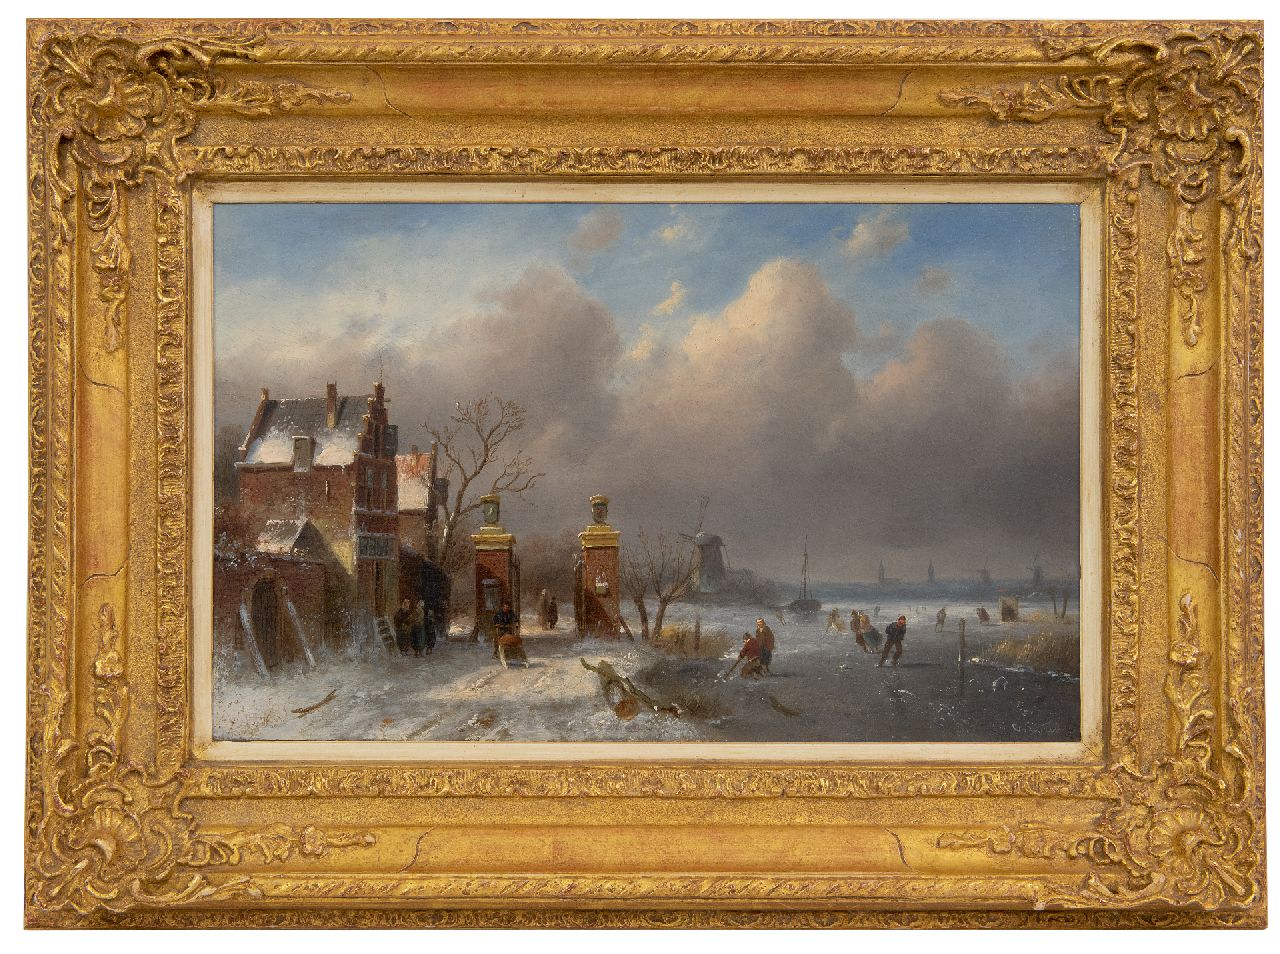 Leickert C.H.J.  | 'Charles' Henri Joseph Leickert | Paintings offered for sale | Skaters on a frozen waterway near the 'Leidsche Hek' in Oegstgeest, oil on panel 25.0 x 40.0 cm, signed l.r.